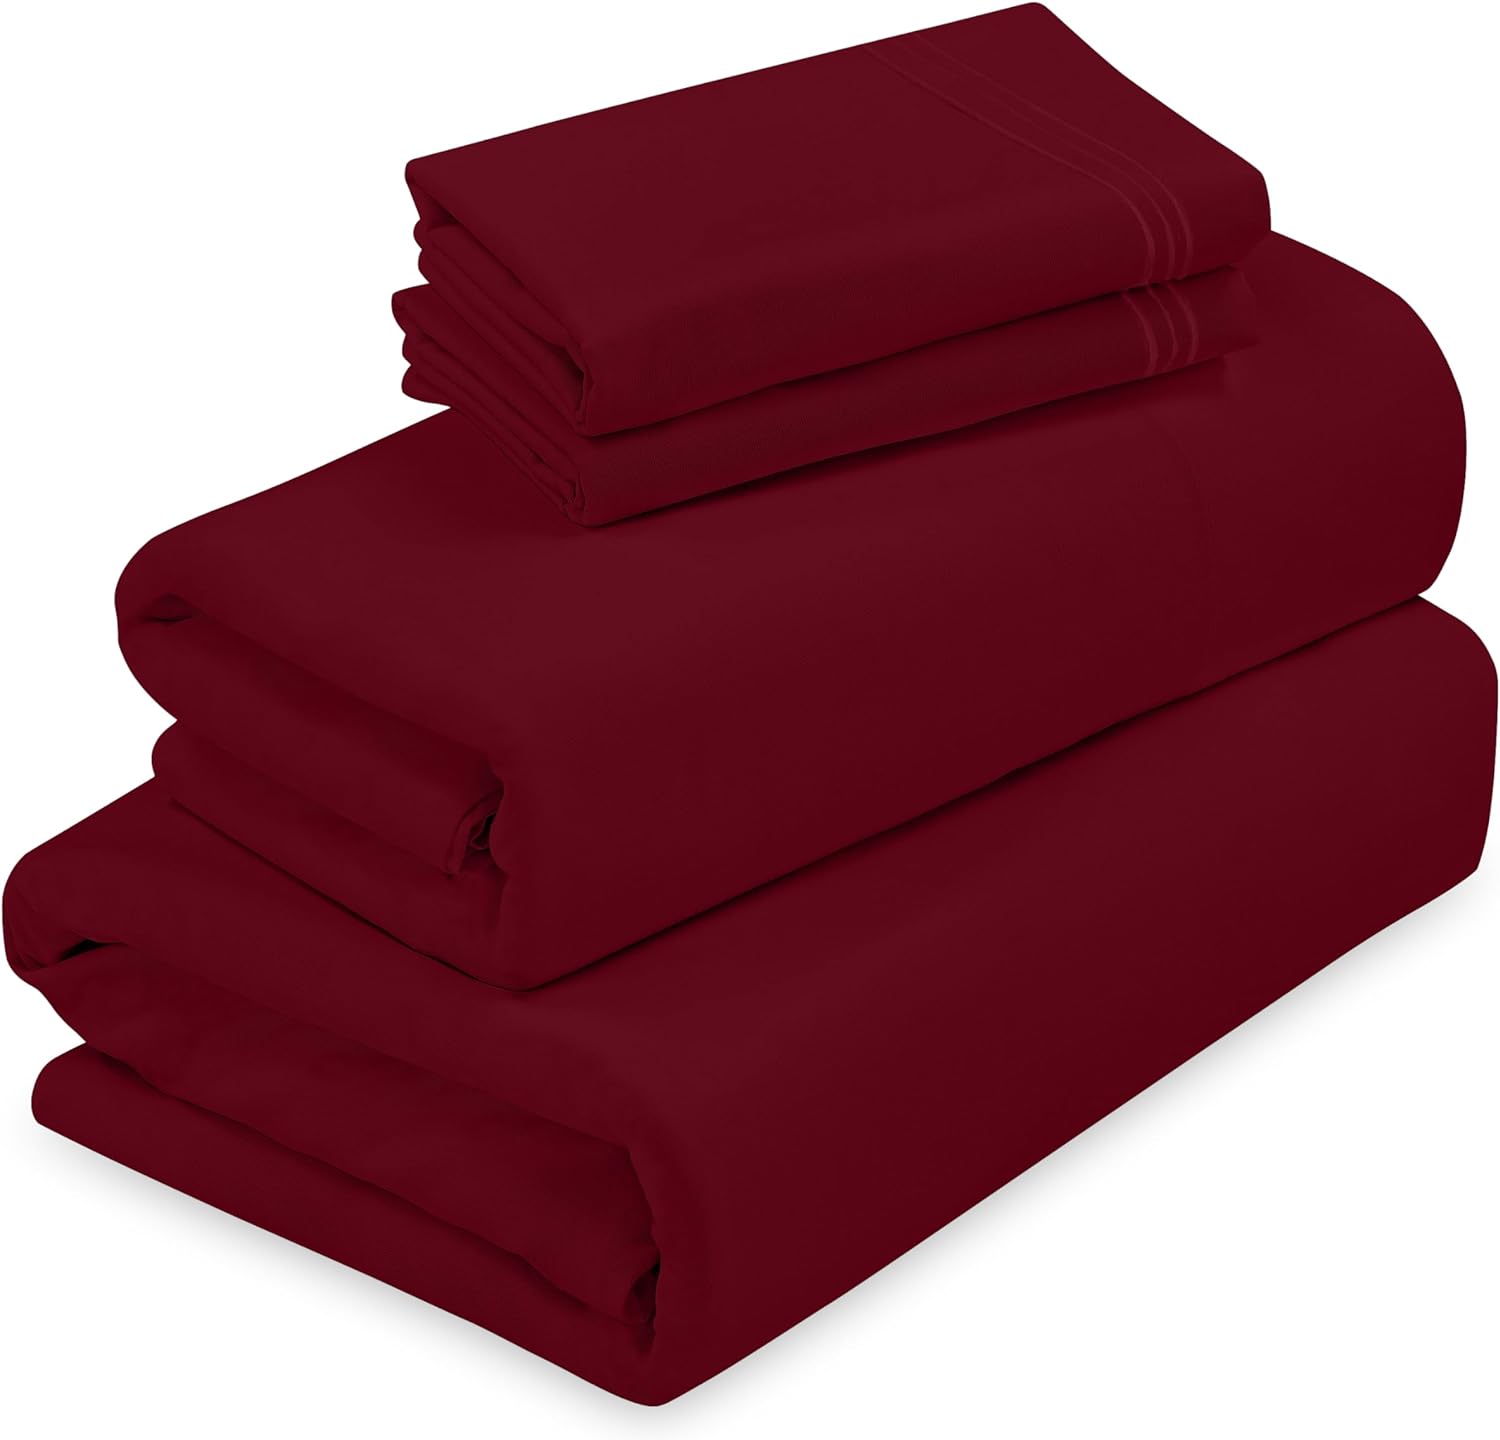 ROYALE LINENS - 4 Piece Queen Bed Sheet - Soft Brushed Microfiber 1800 Bedding Set - 1 Fitted Sheet, 1 Flat Sheet, 2 Pillow Case - Wrinkle & Fade Resistant Luxury Queen Size Sheet Set (Queen,Burgundy)